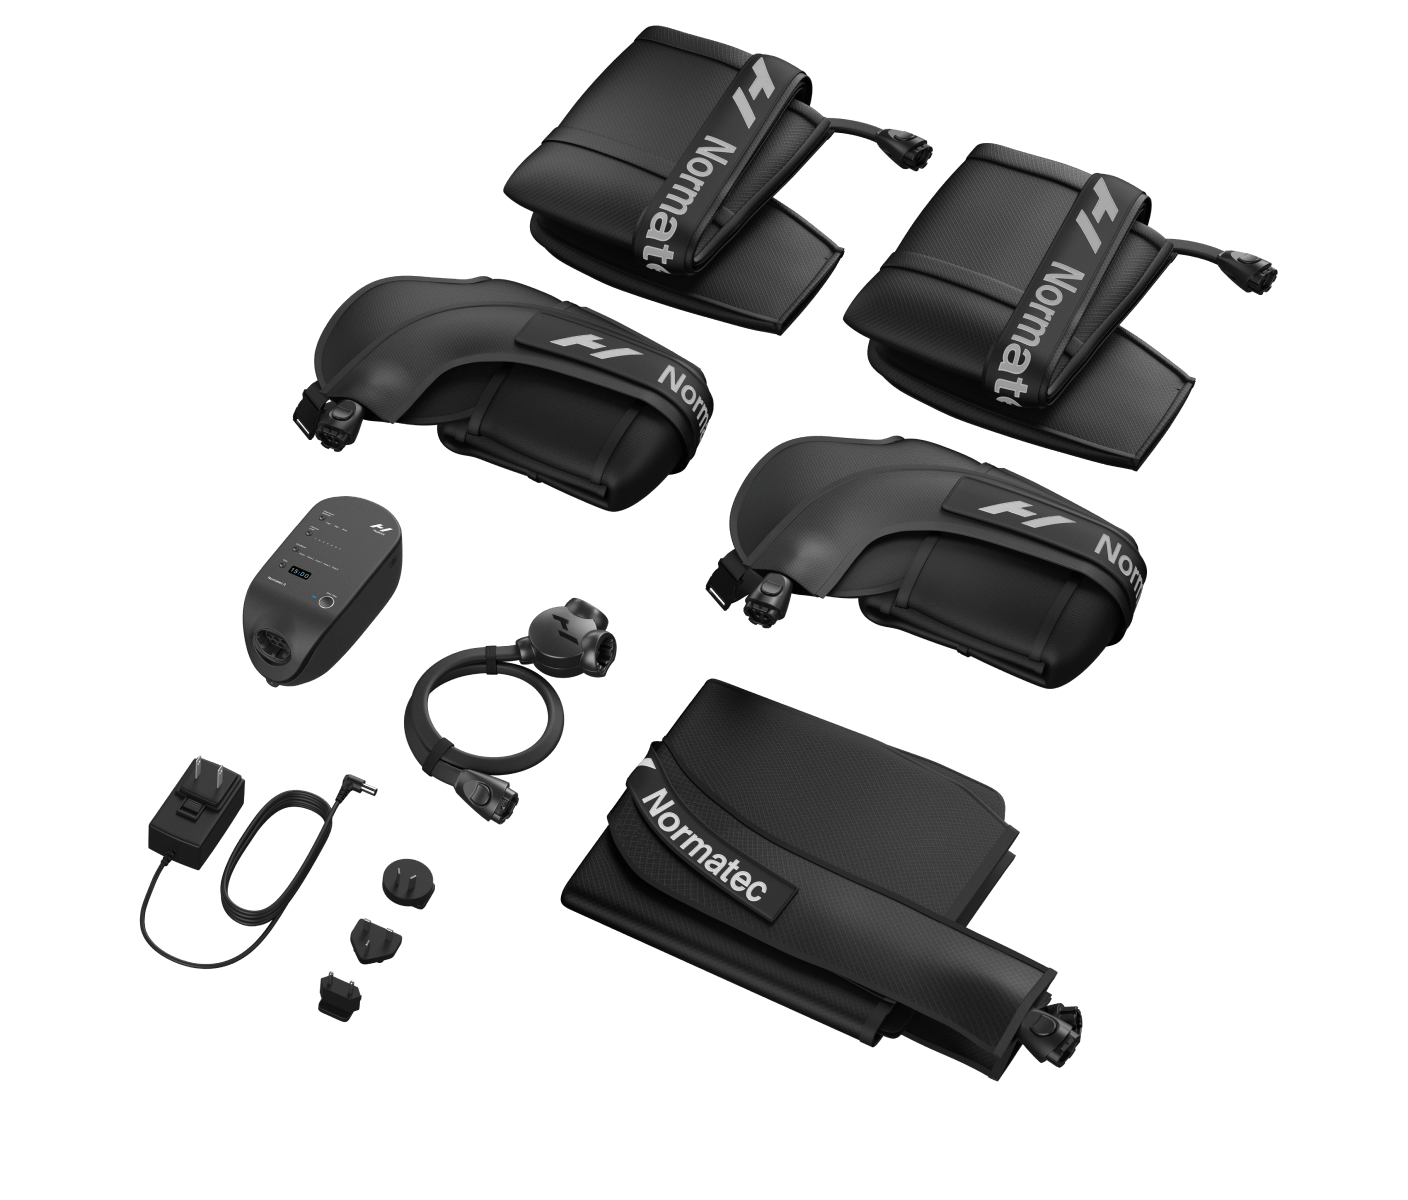 What’s included with your Normatec 3 Full Body